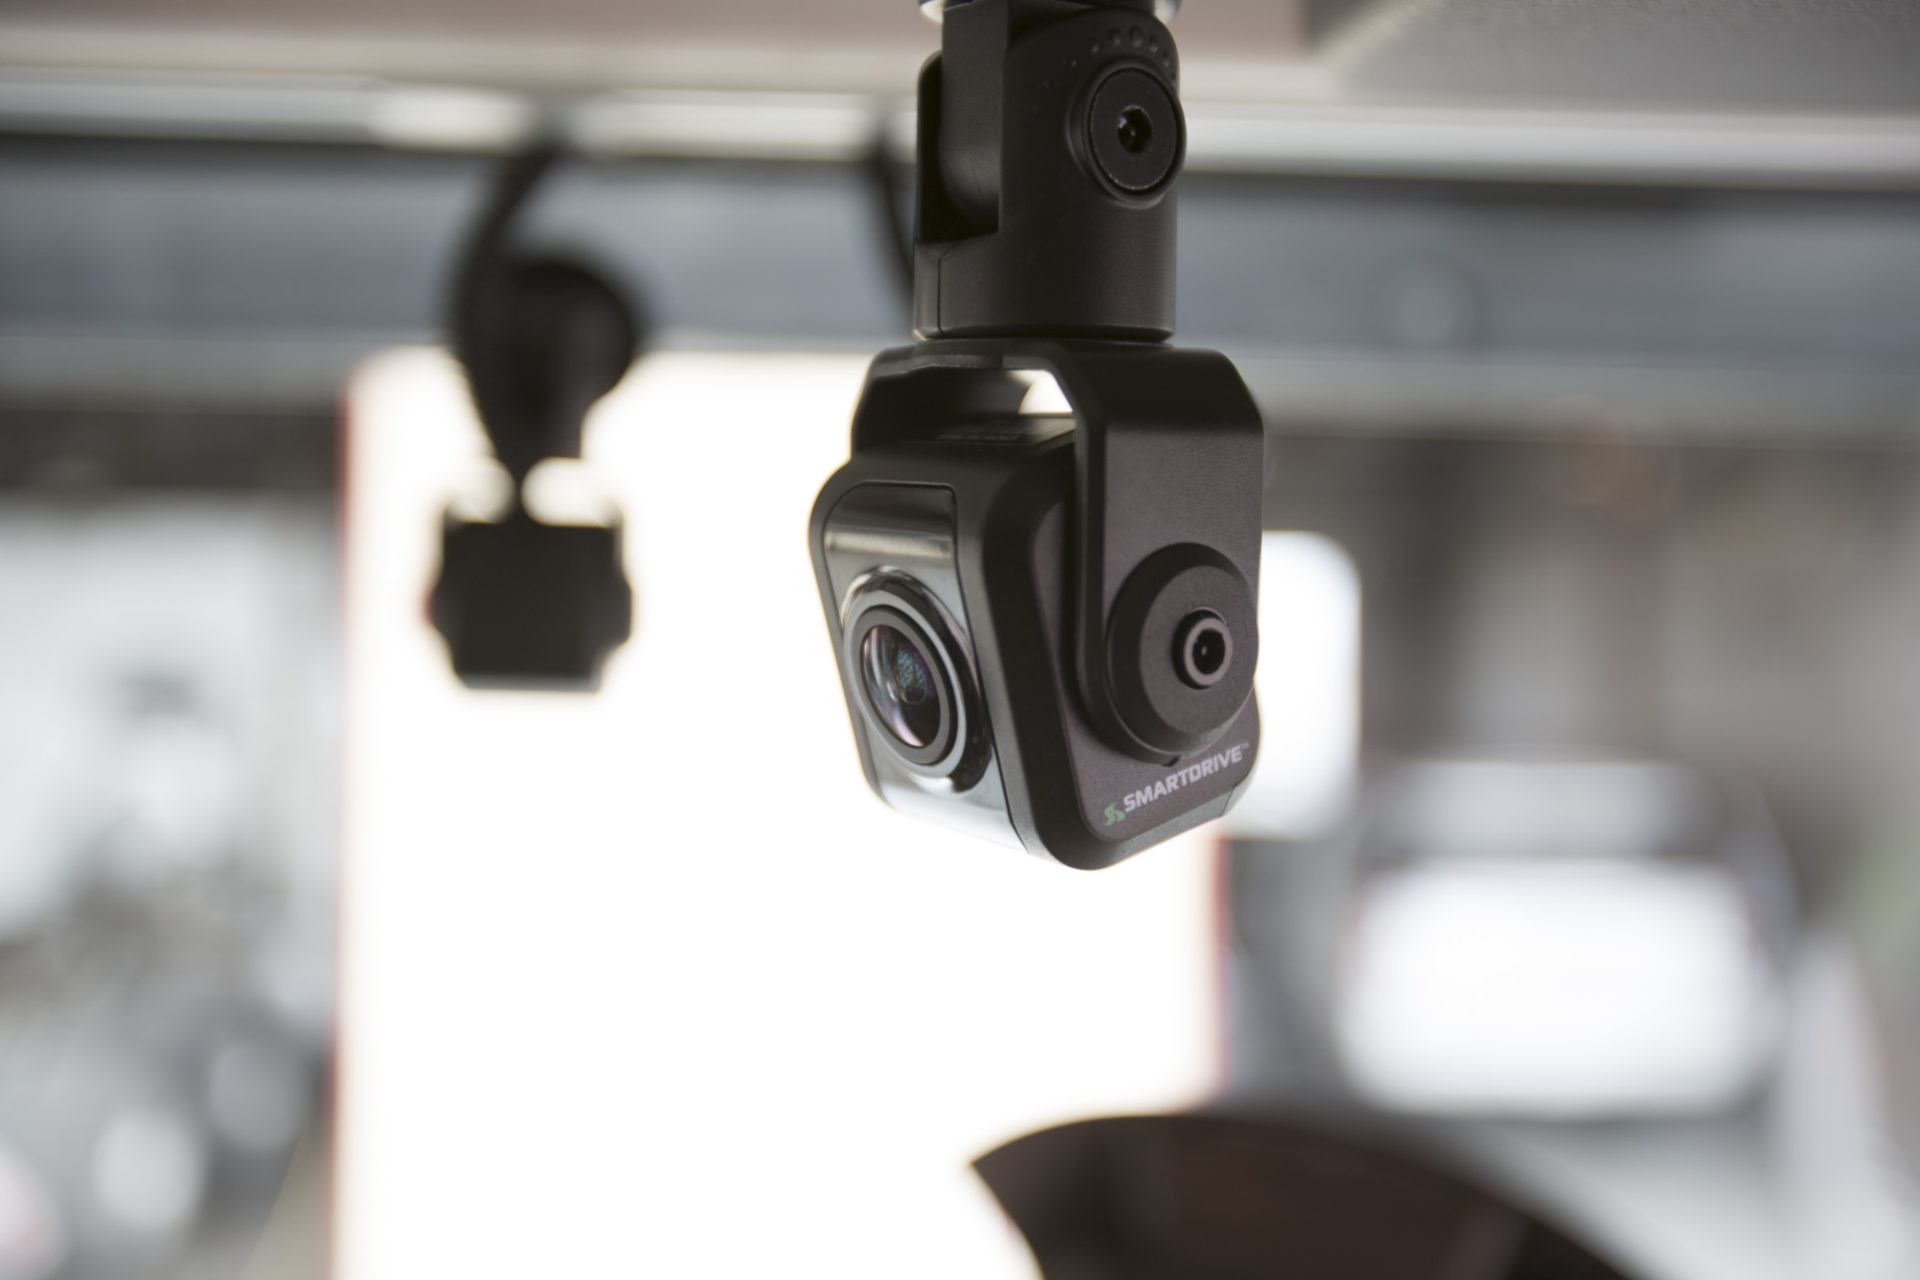 How Construction Companies Can Benefit from Truck Dashcams